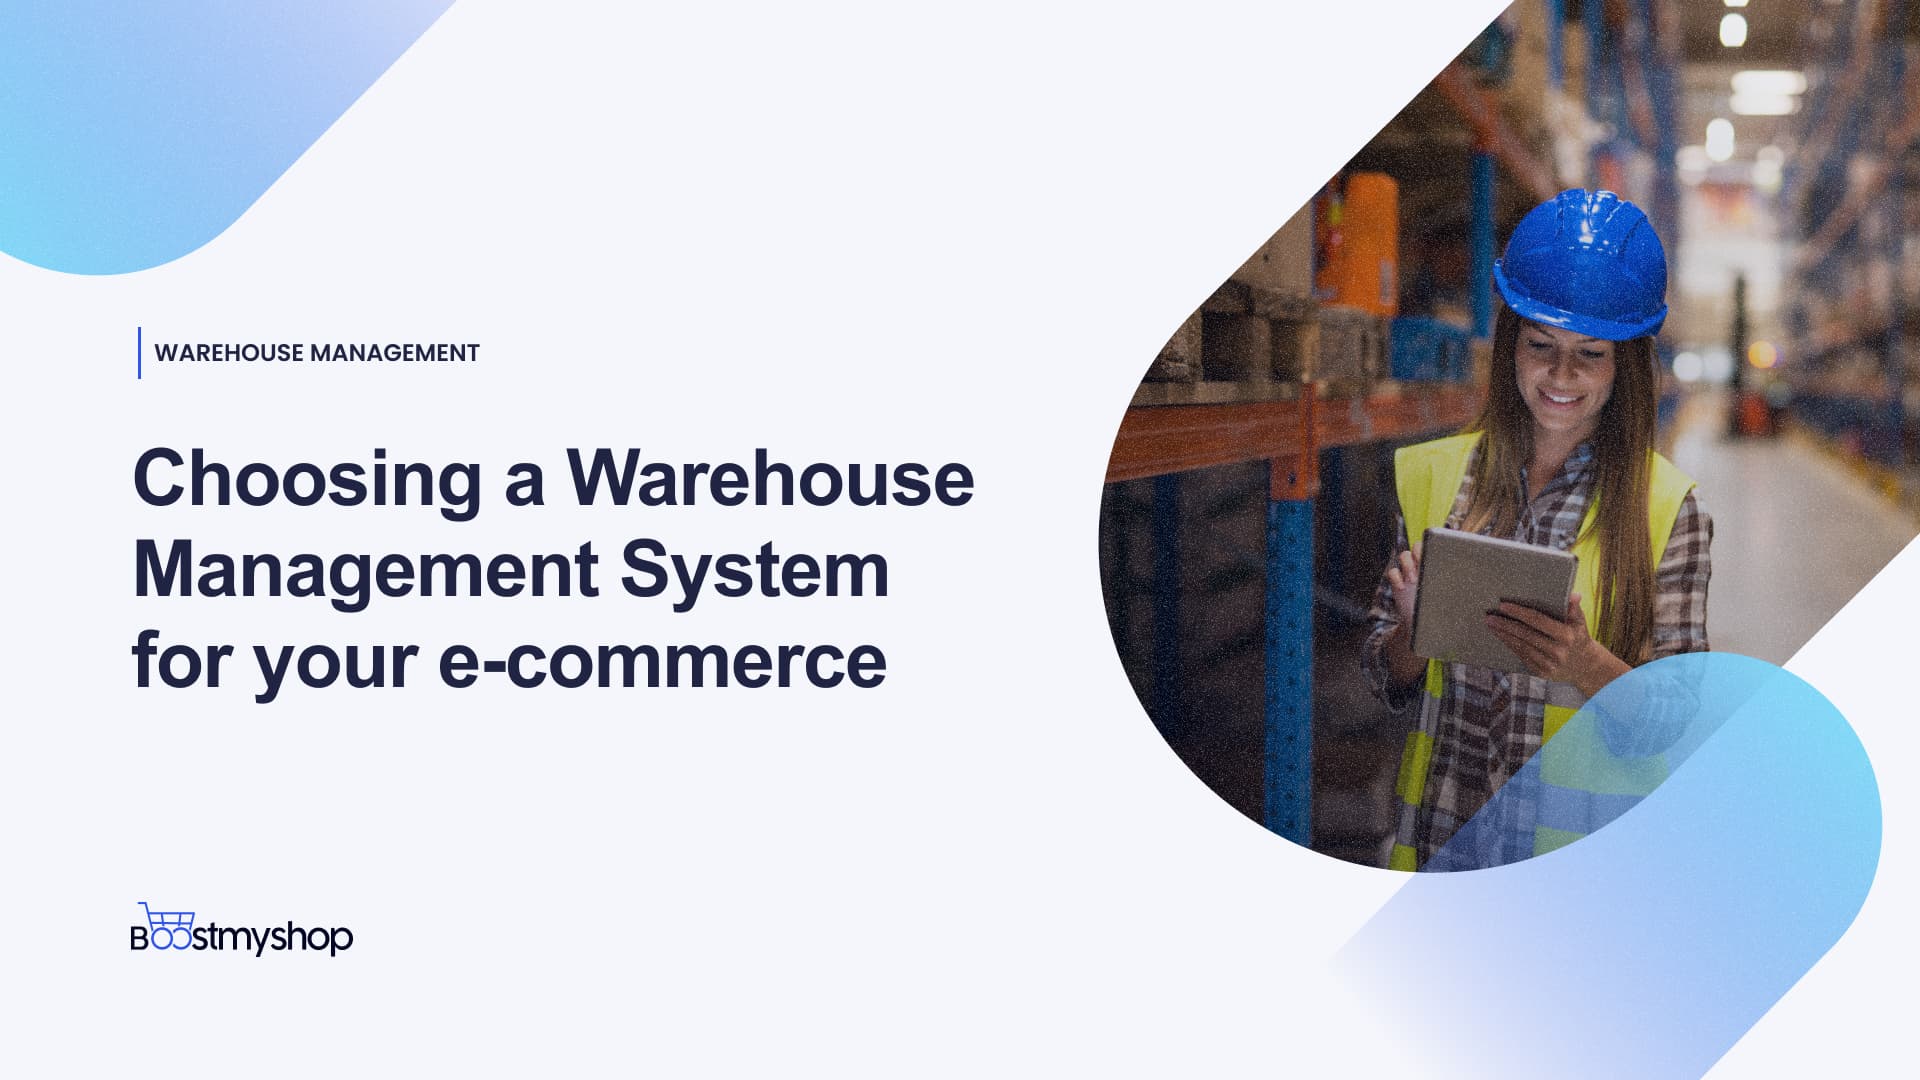 Warehouse Management System (WMS) for Your E-commerce